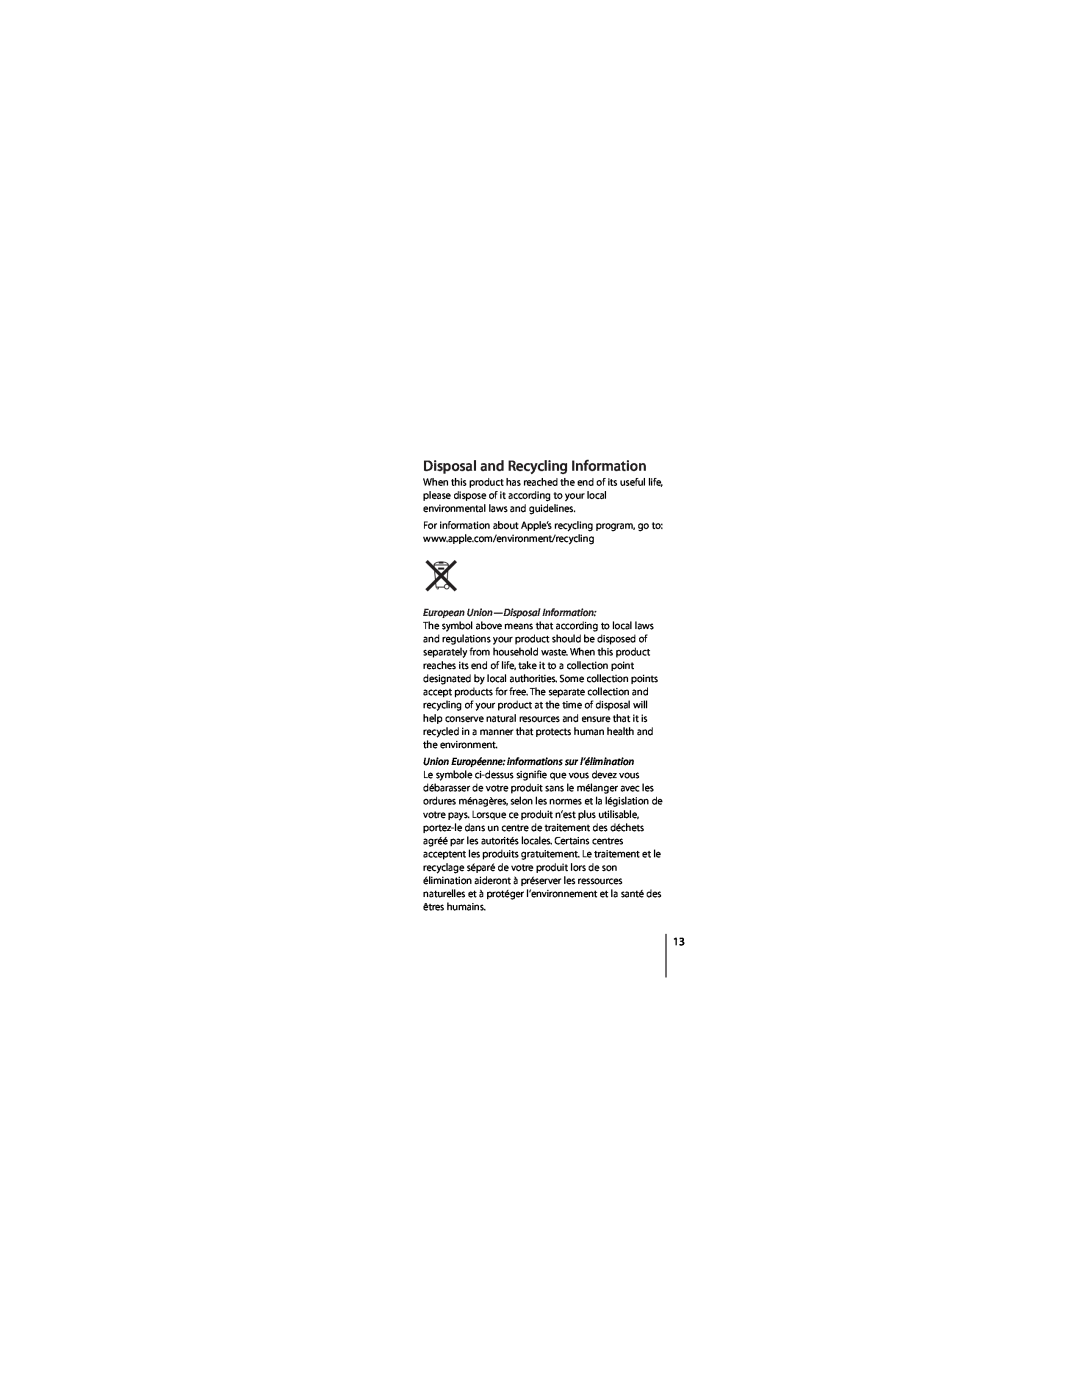 Apple ZM034-4835-A manual Disposal and Recycling Information, European Union-Disposal Information 